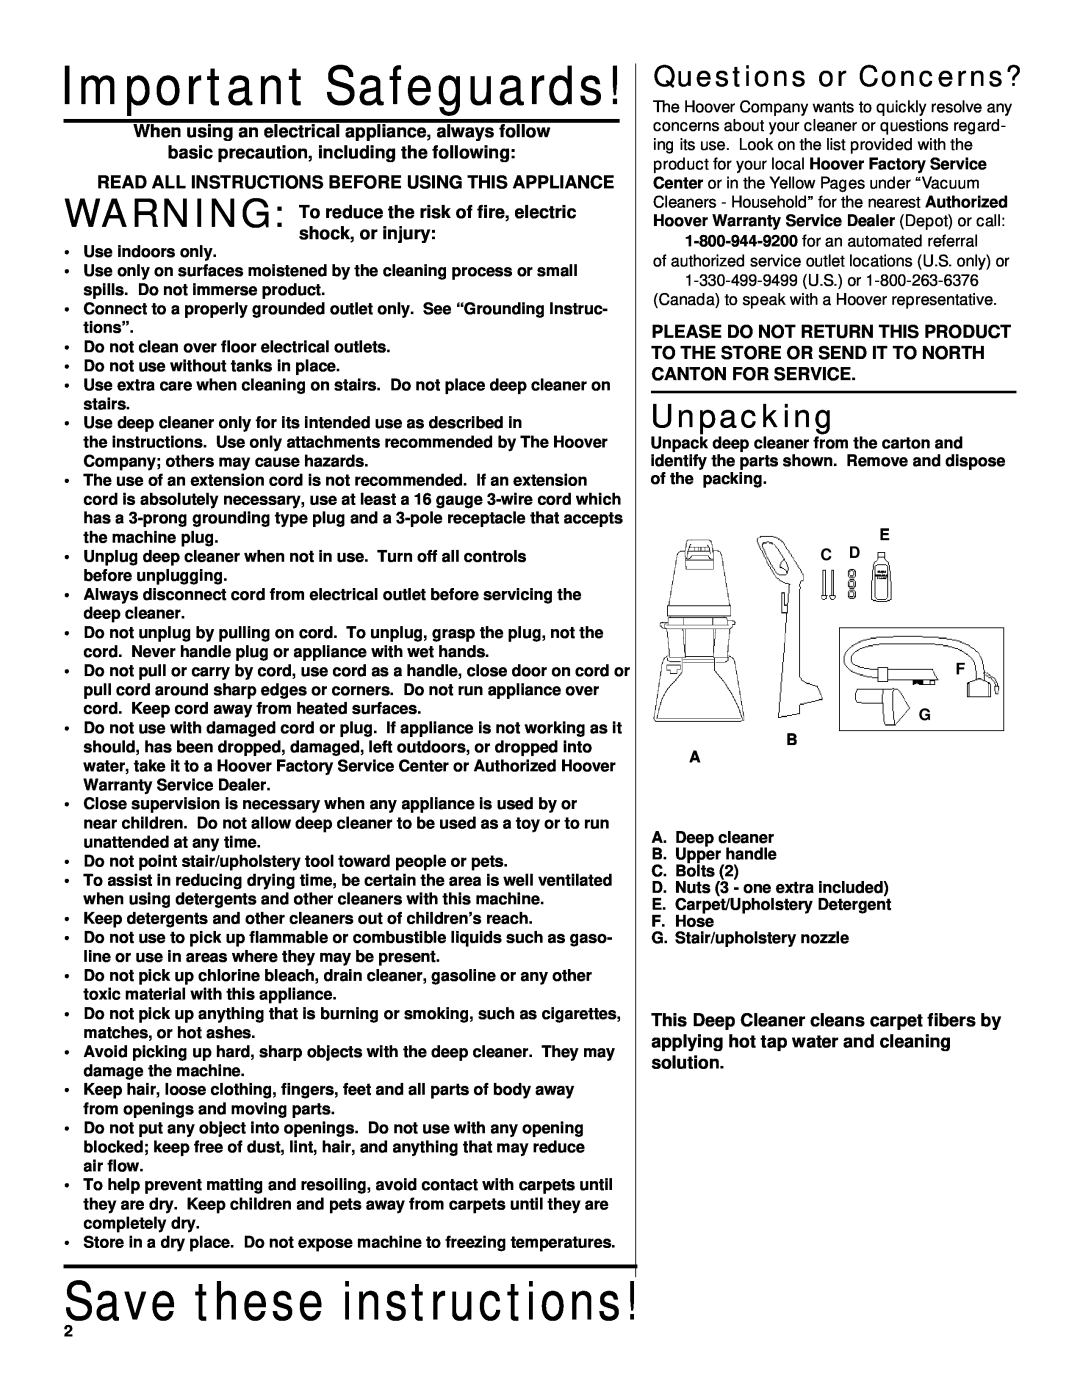 Hoover Deep Cleaner Important Safeguards, Save these instructions, Unpacking, basic precaution, including the following 